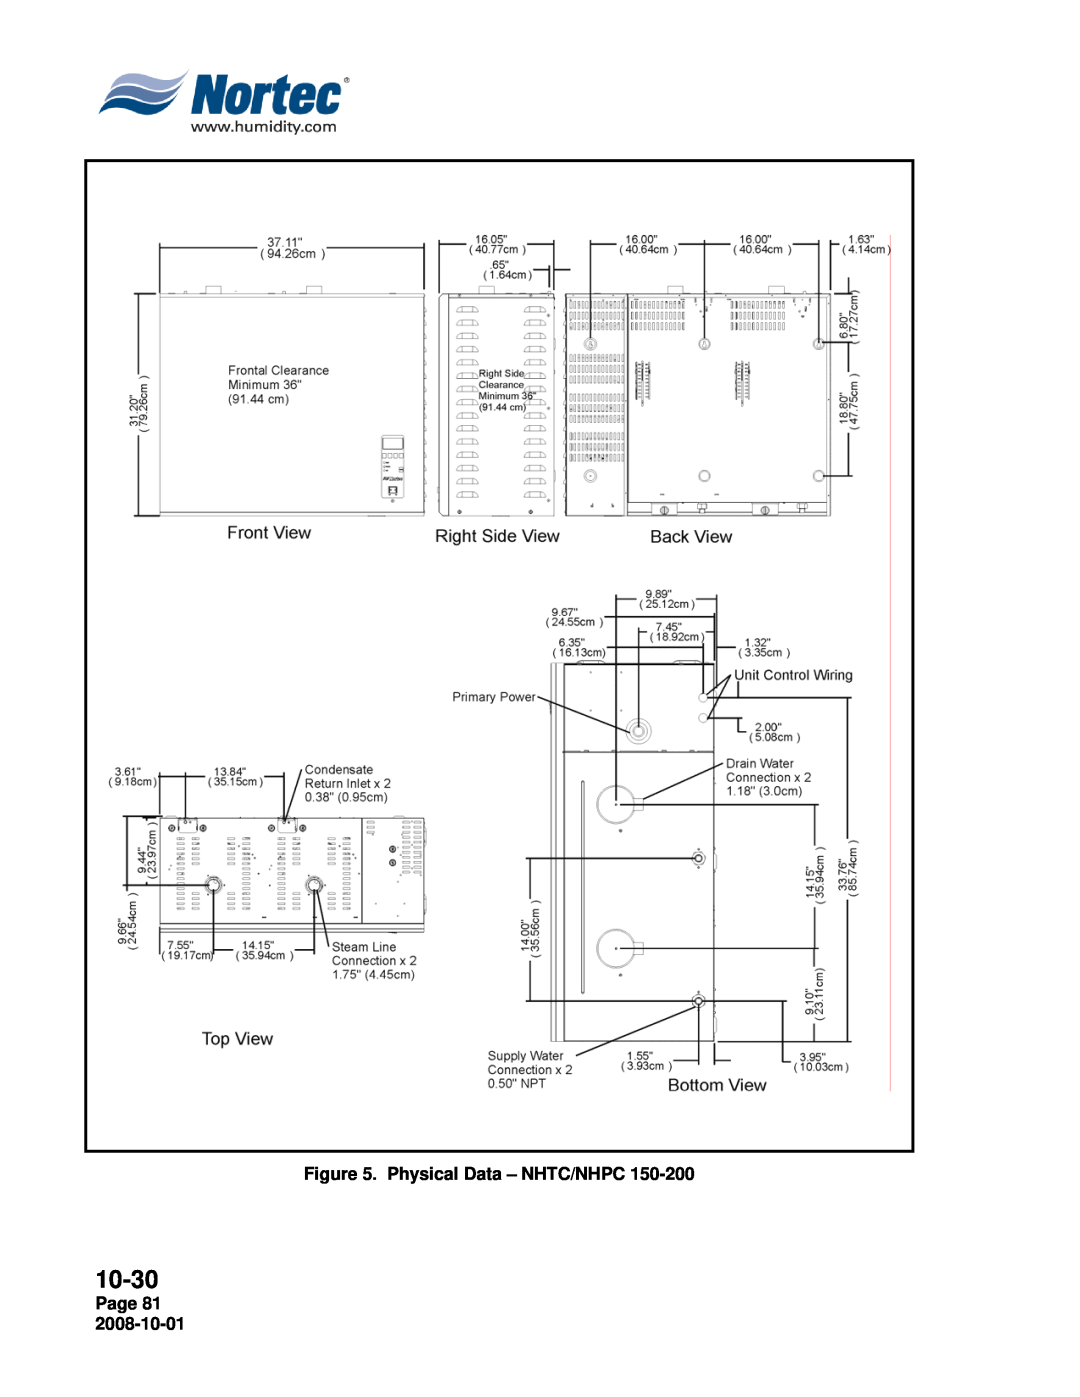 Nortec manual 10-30, Physical Data – NHTC/NHPC, Page 81 